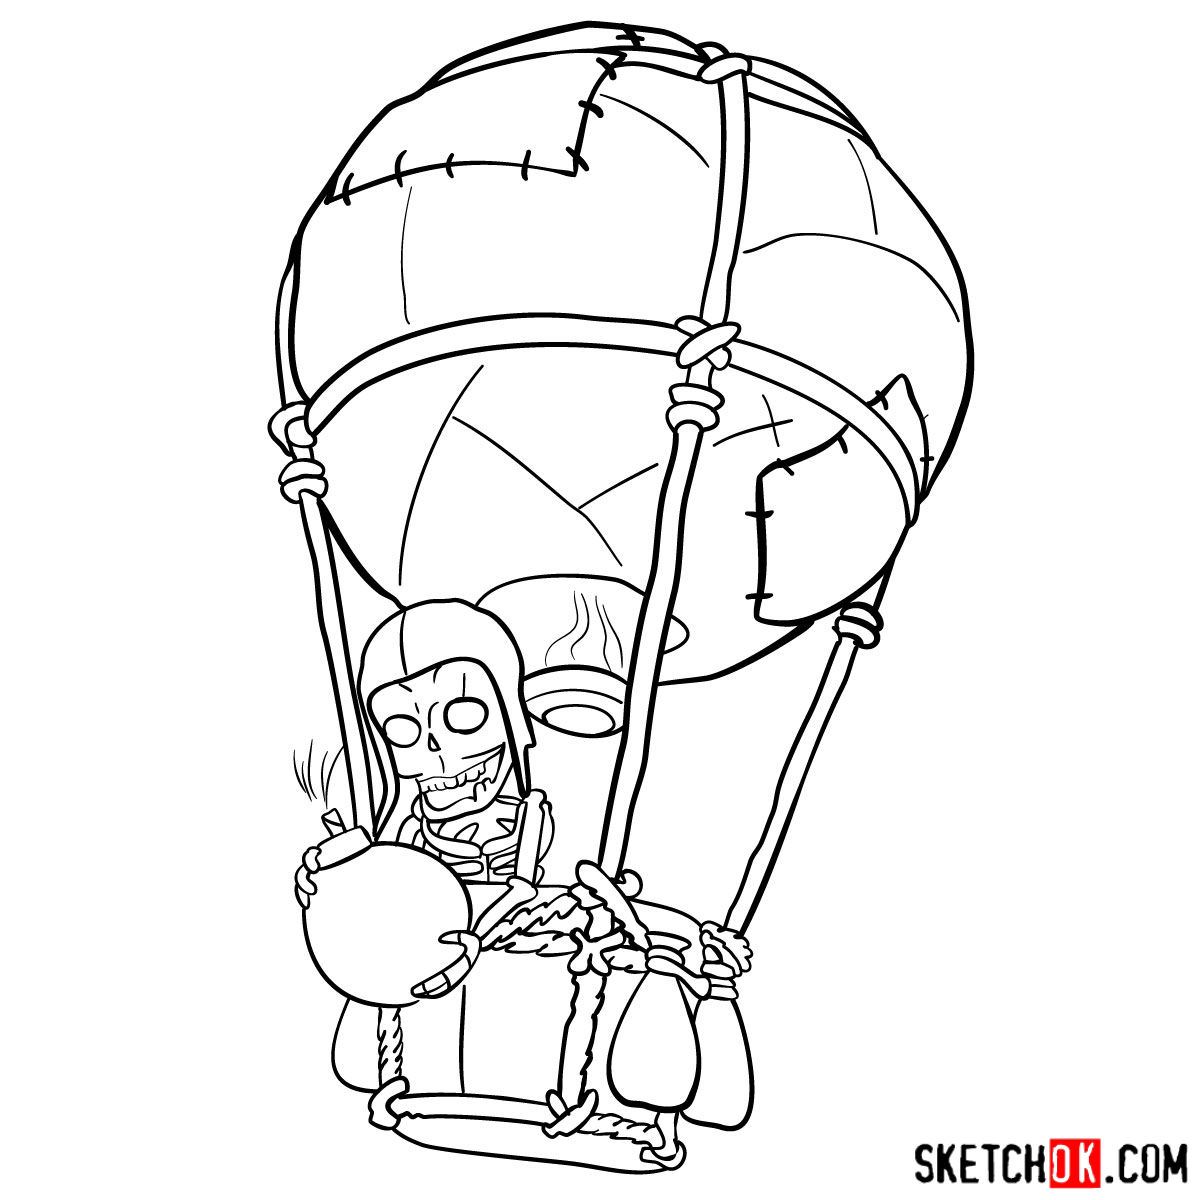 How to draw Balloon with a skeleton - step 13